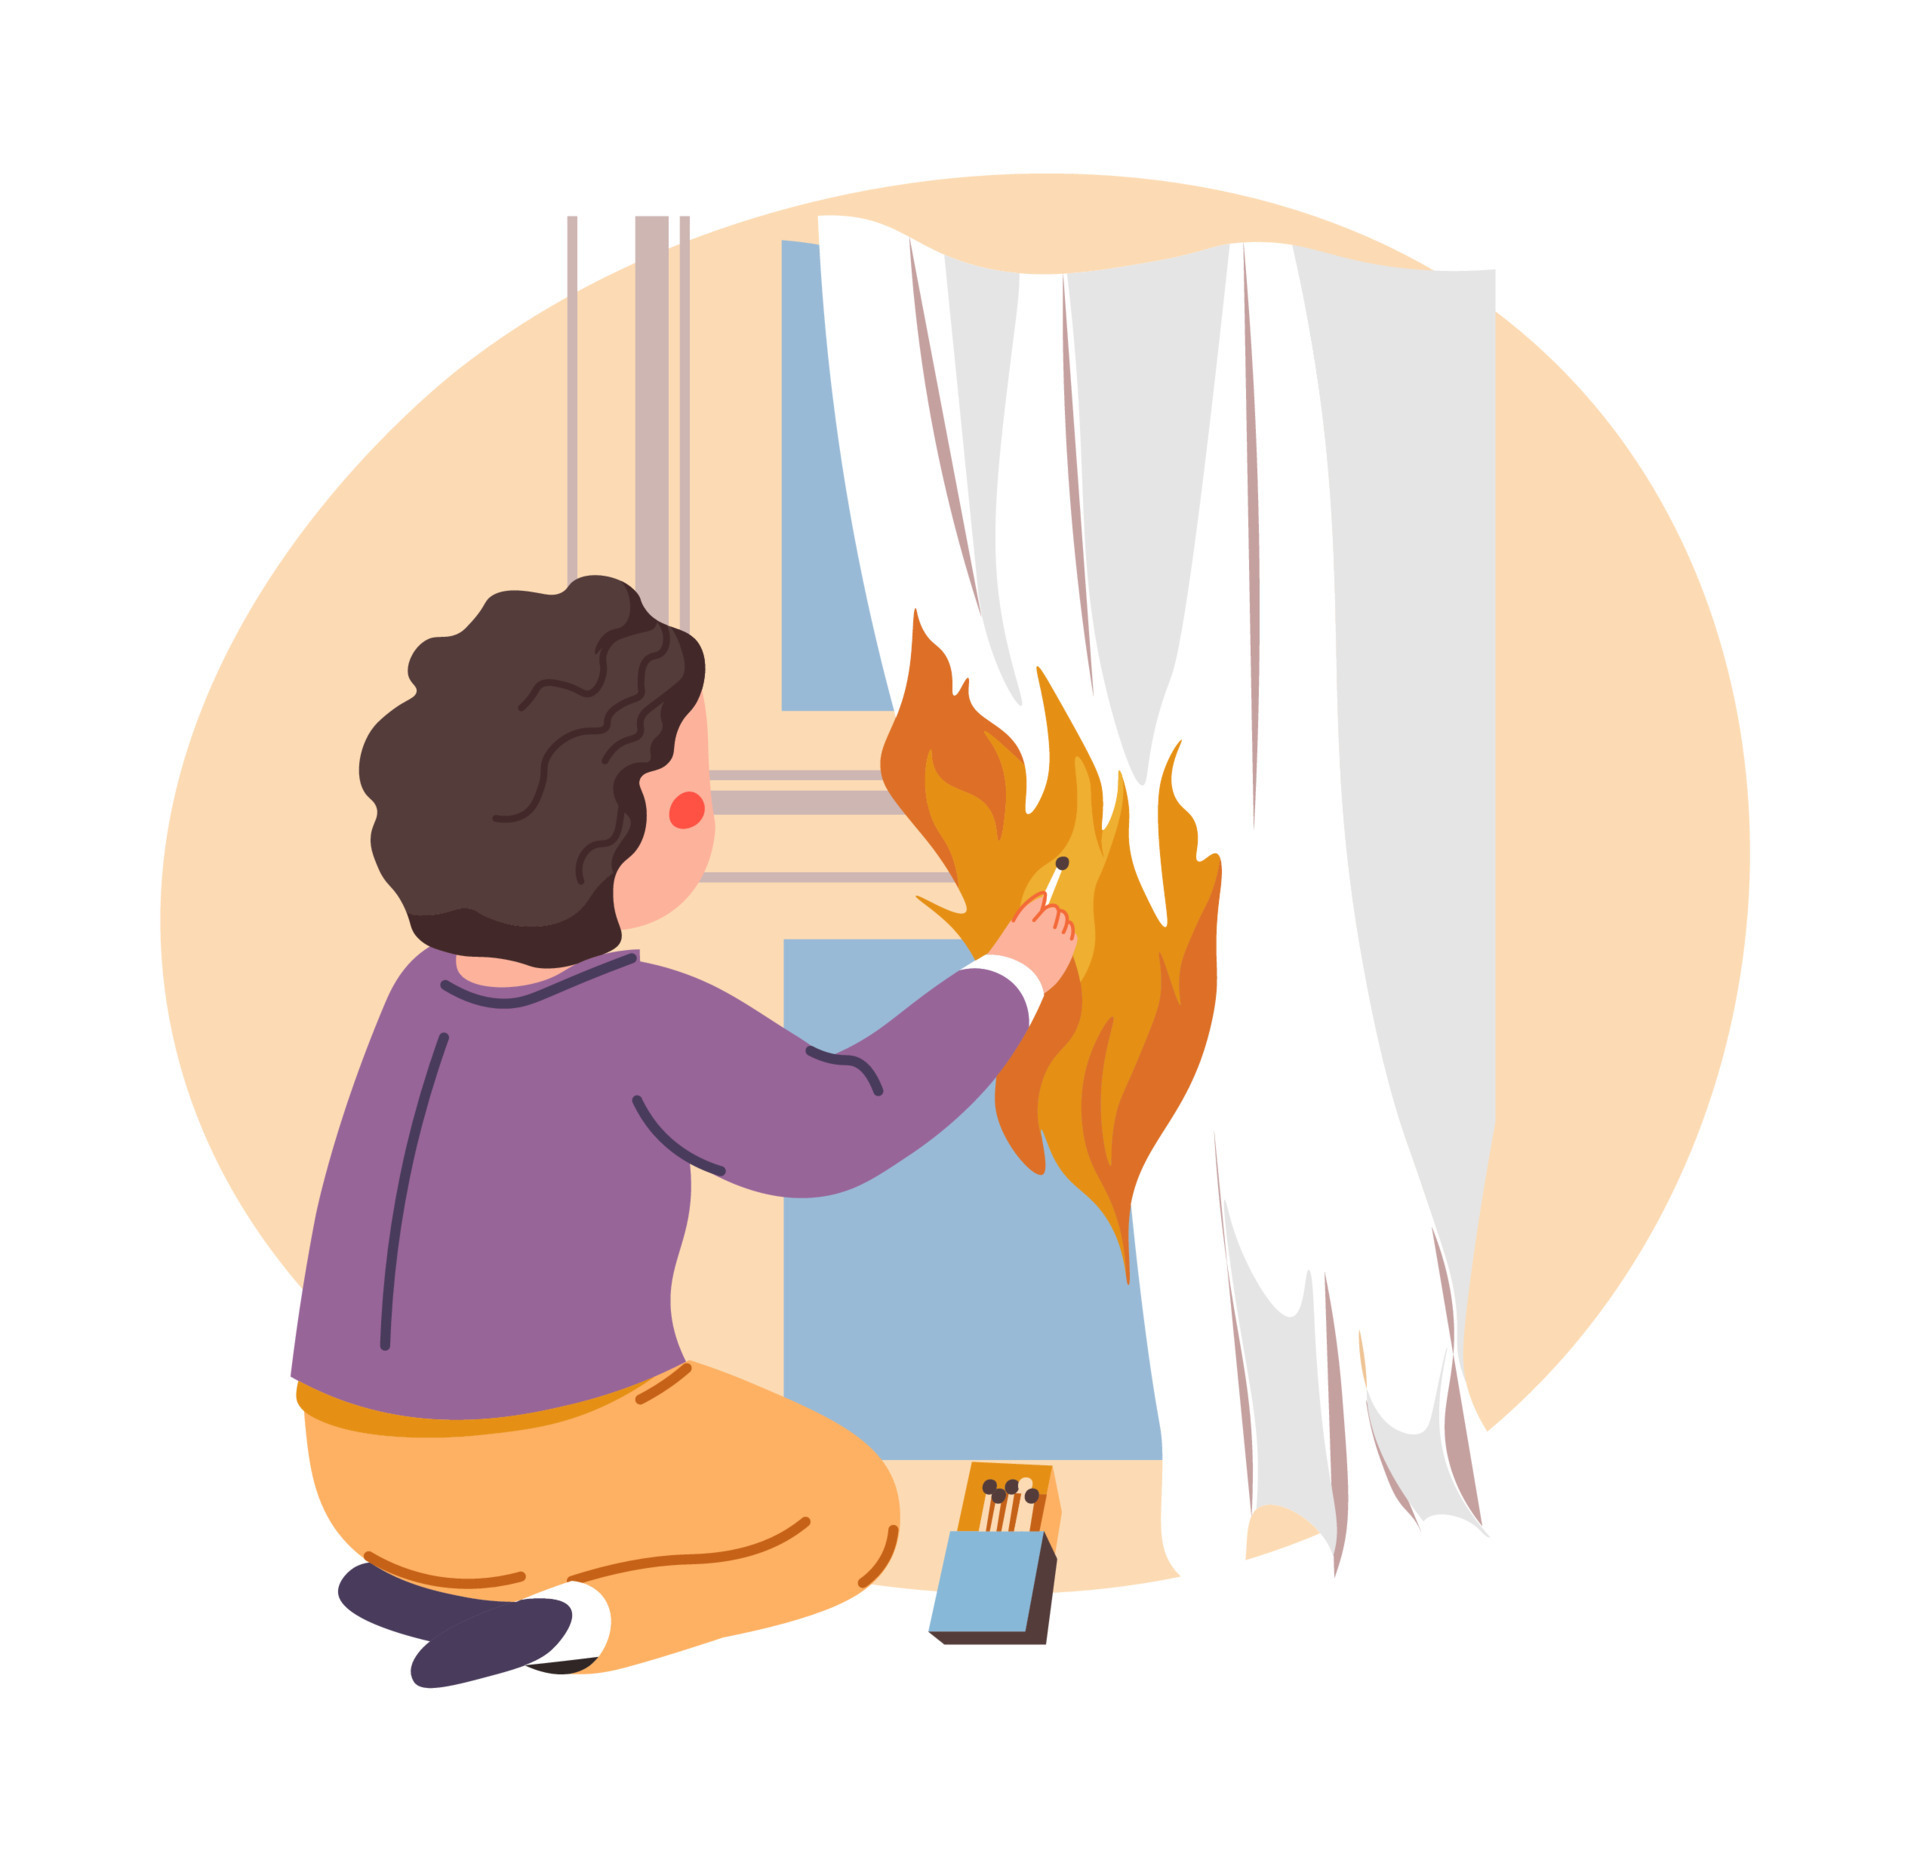 Little girl playing with matches kid in dangerous Vector Image